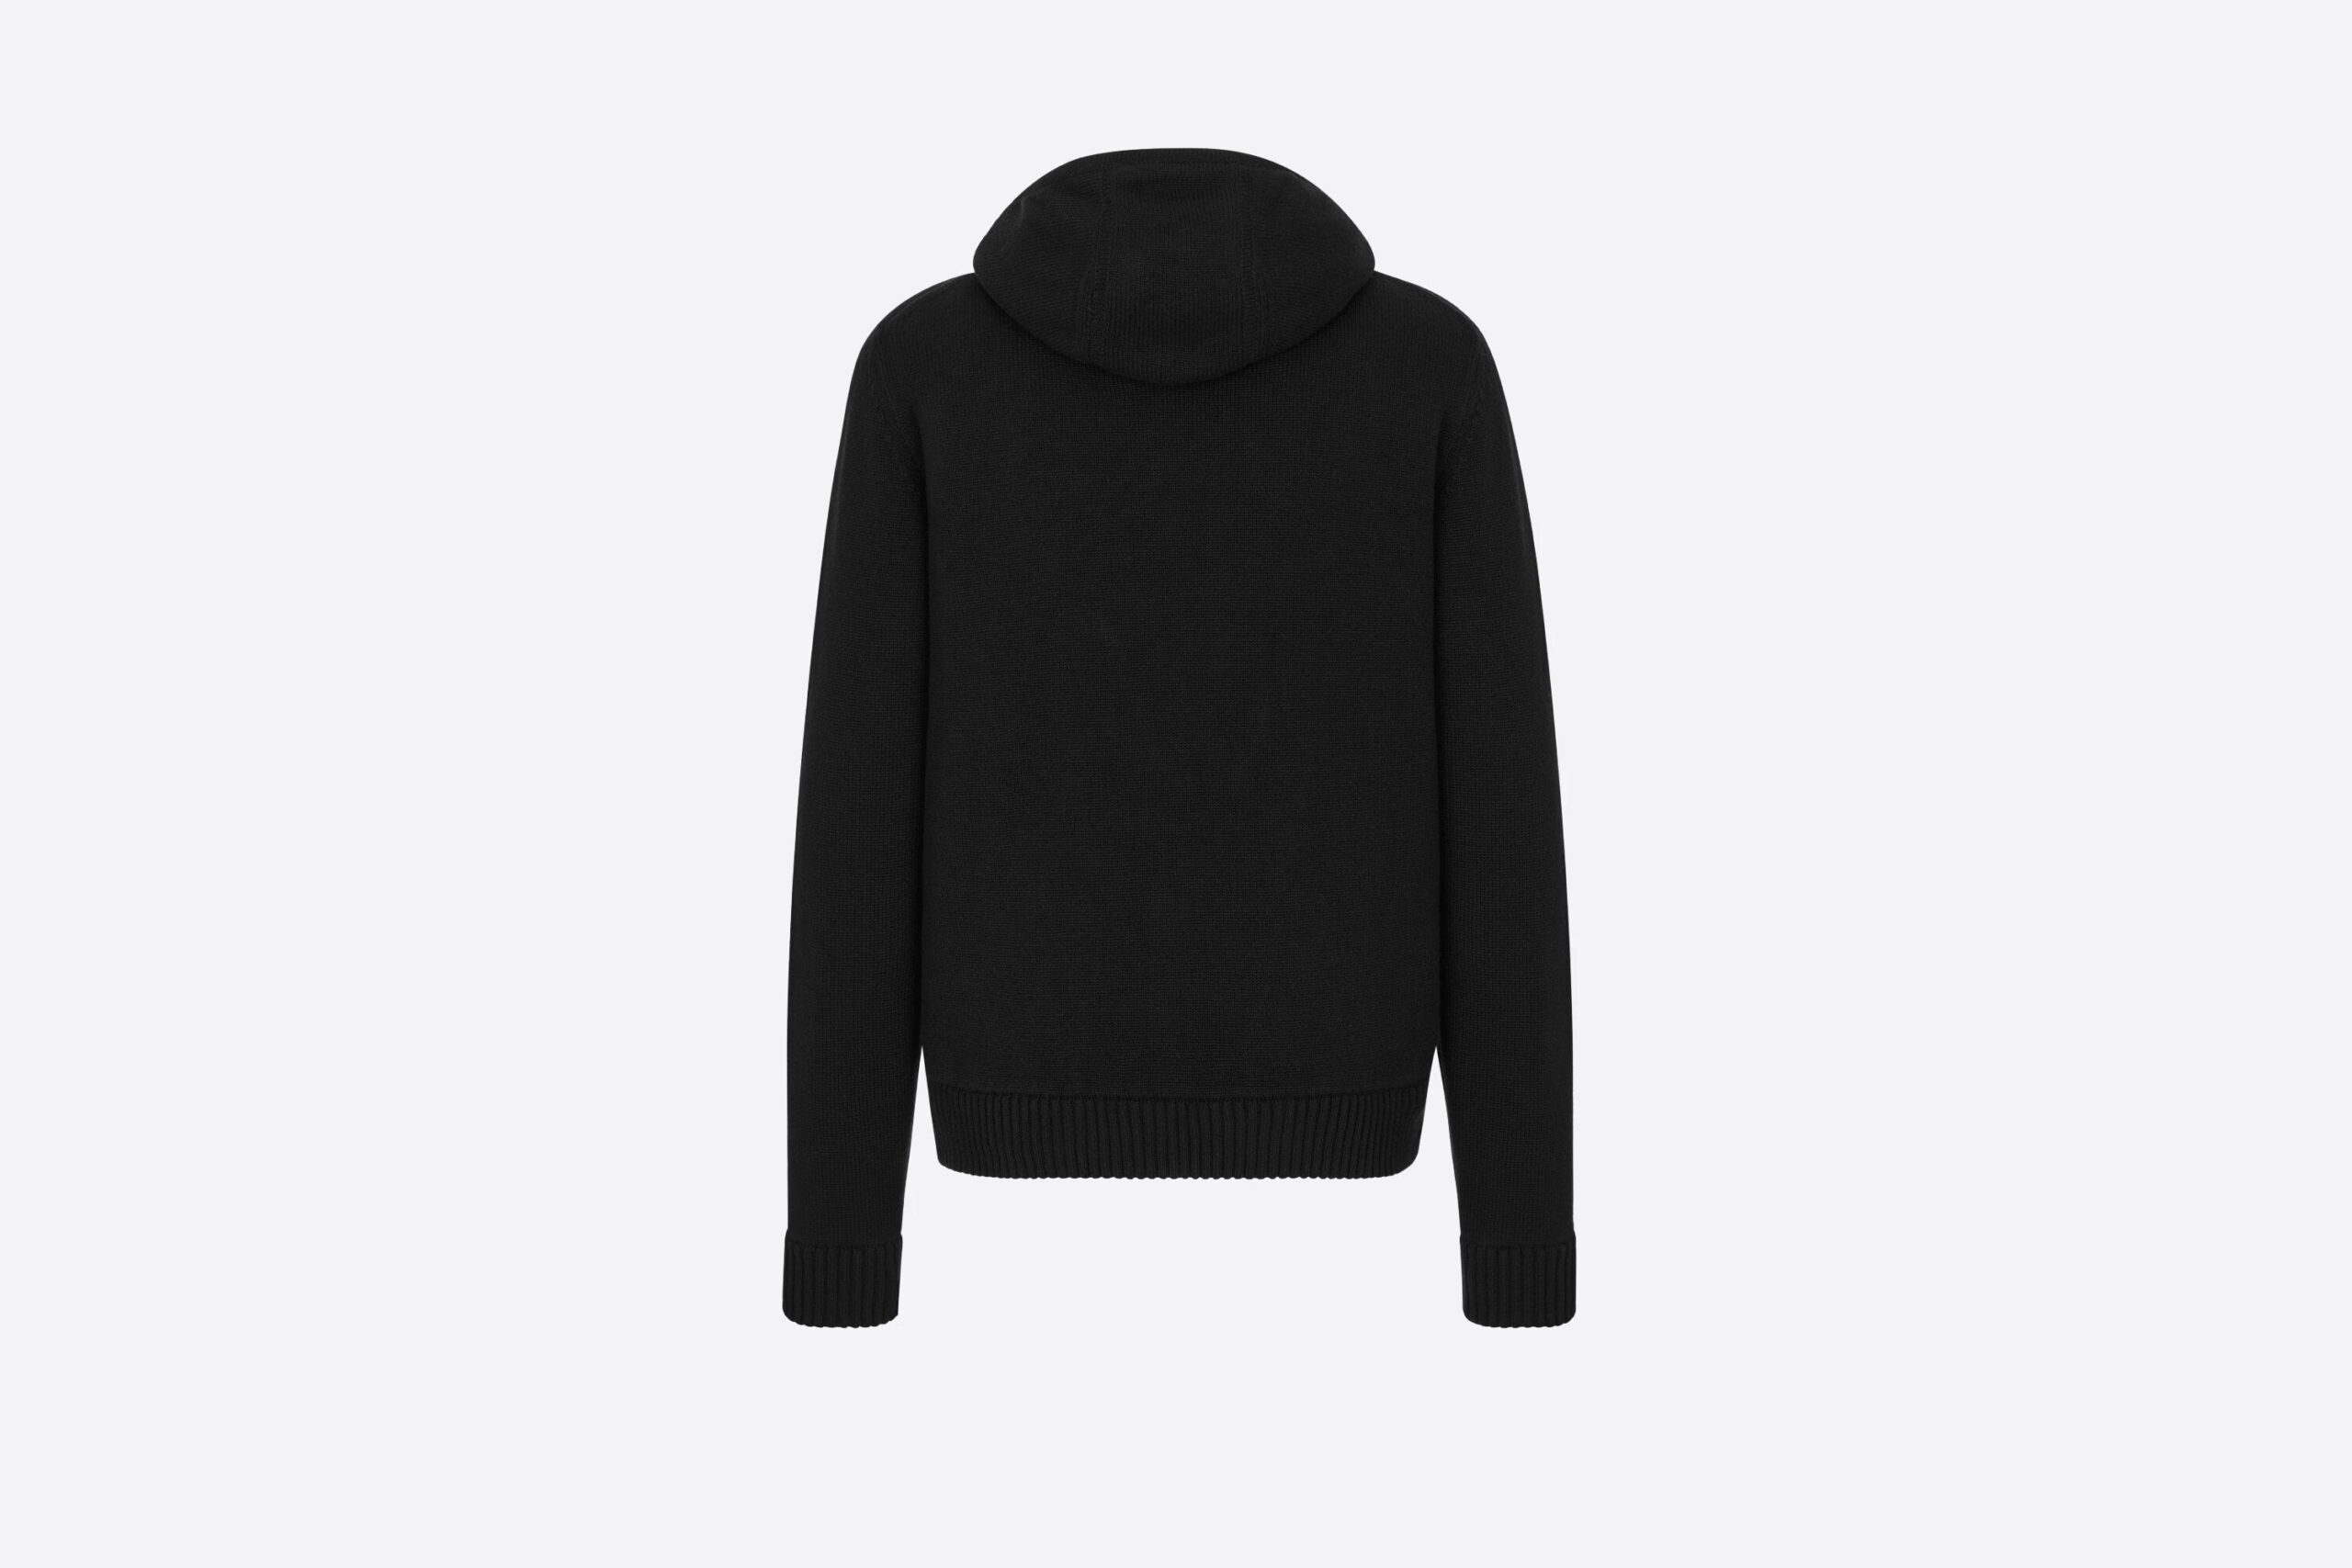 Dior zip-up hoodie in cashmere knit - Clothes Rep